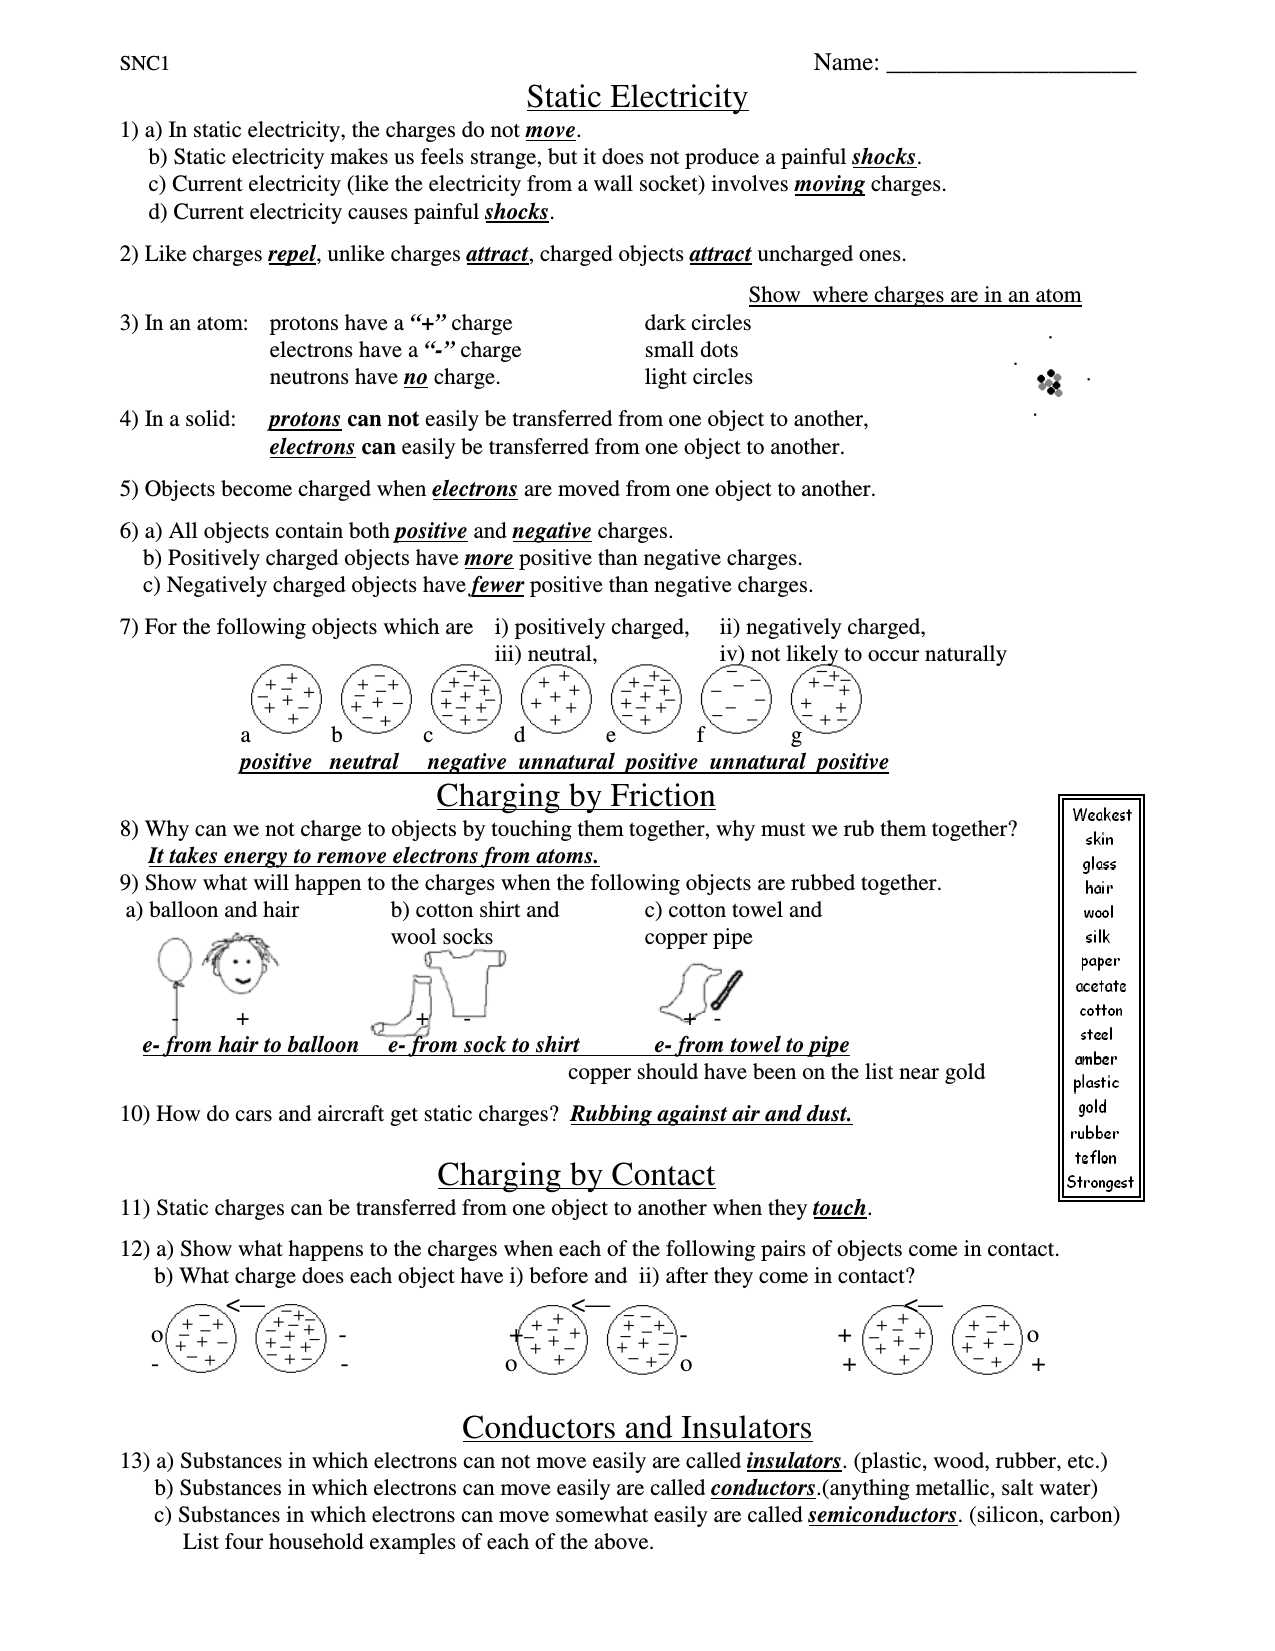 Bill Nye Energy Worksheet Answers and Bill Nye the Science Guy Static Electricity Worksheet Answers